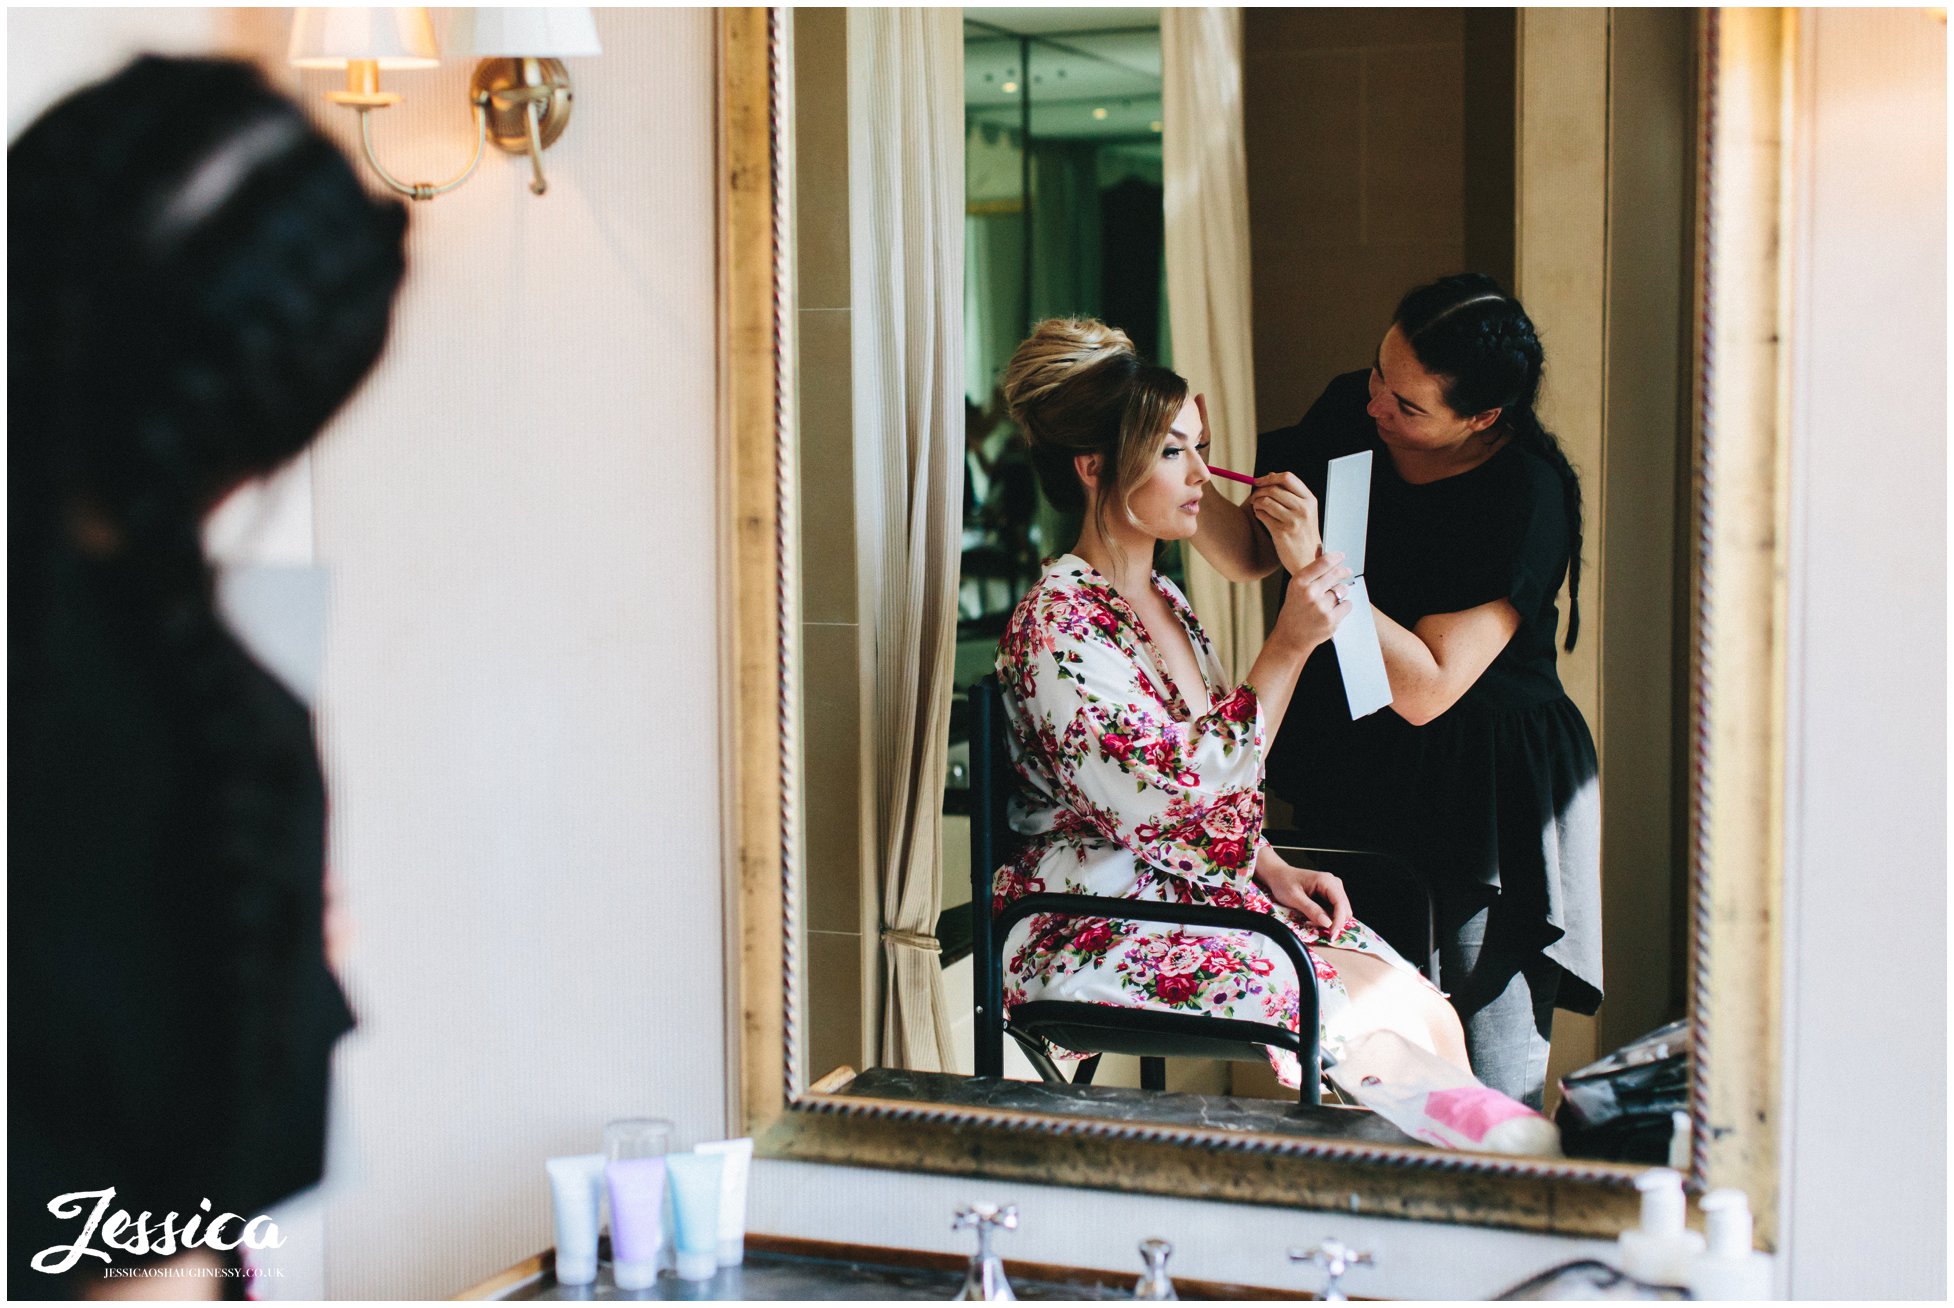 the bride has last make-up touches before the ceremony